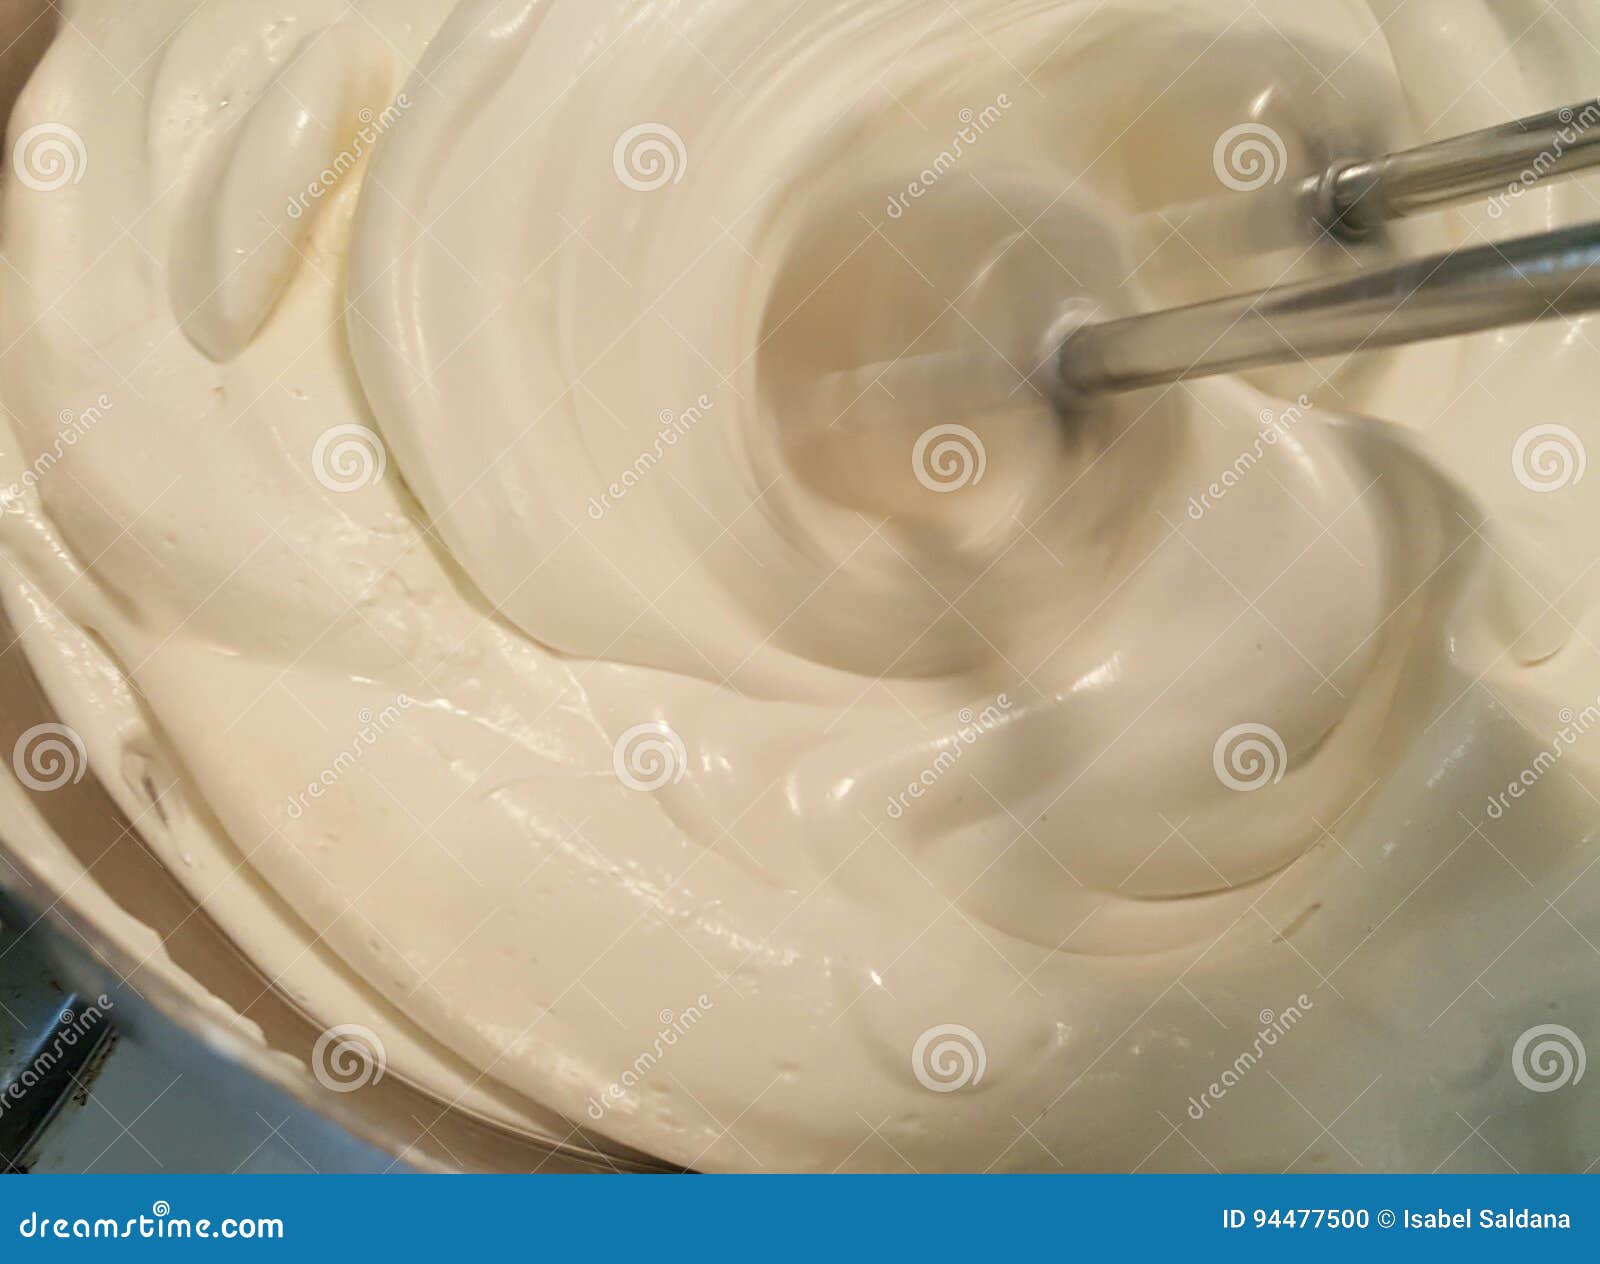 whipping body butter